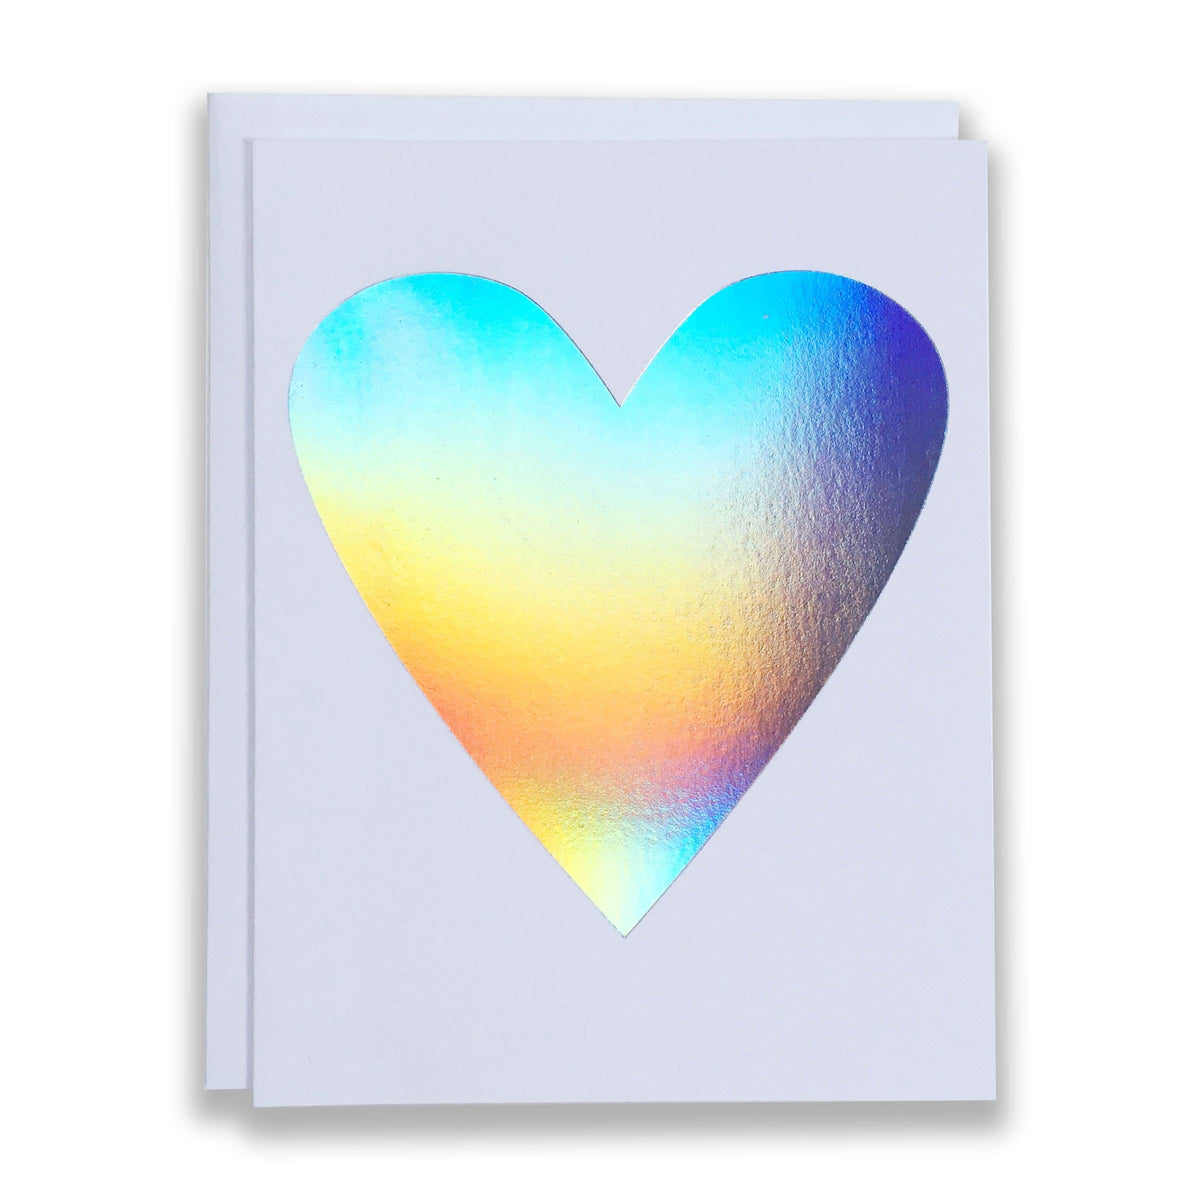 Hologram Heart Note Card: 4.25 x 5.5 inches